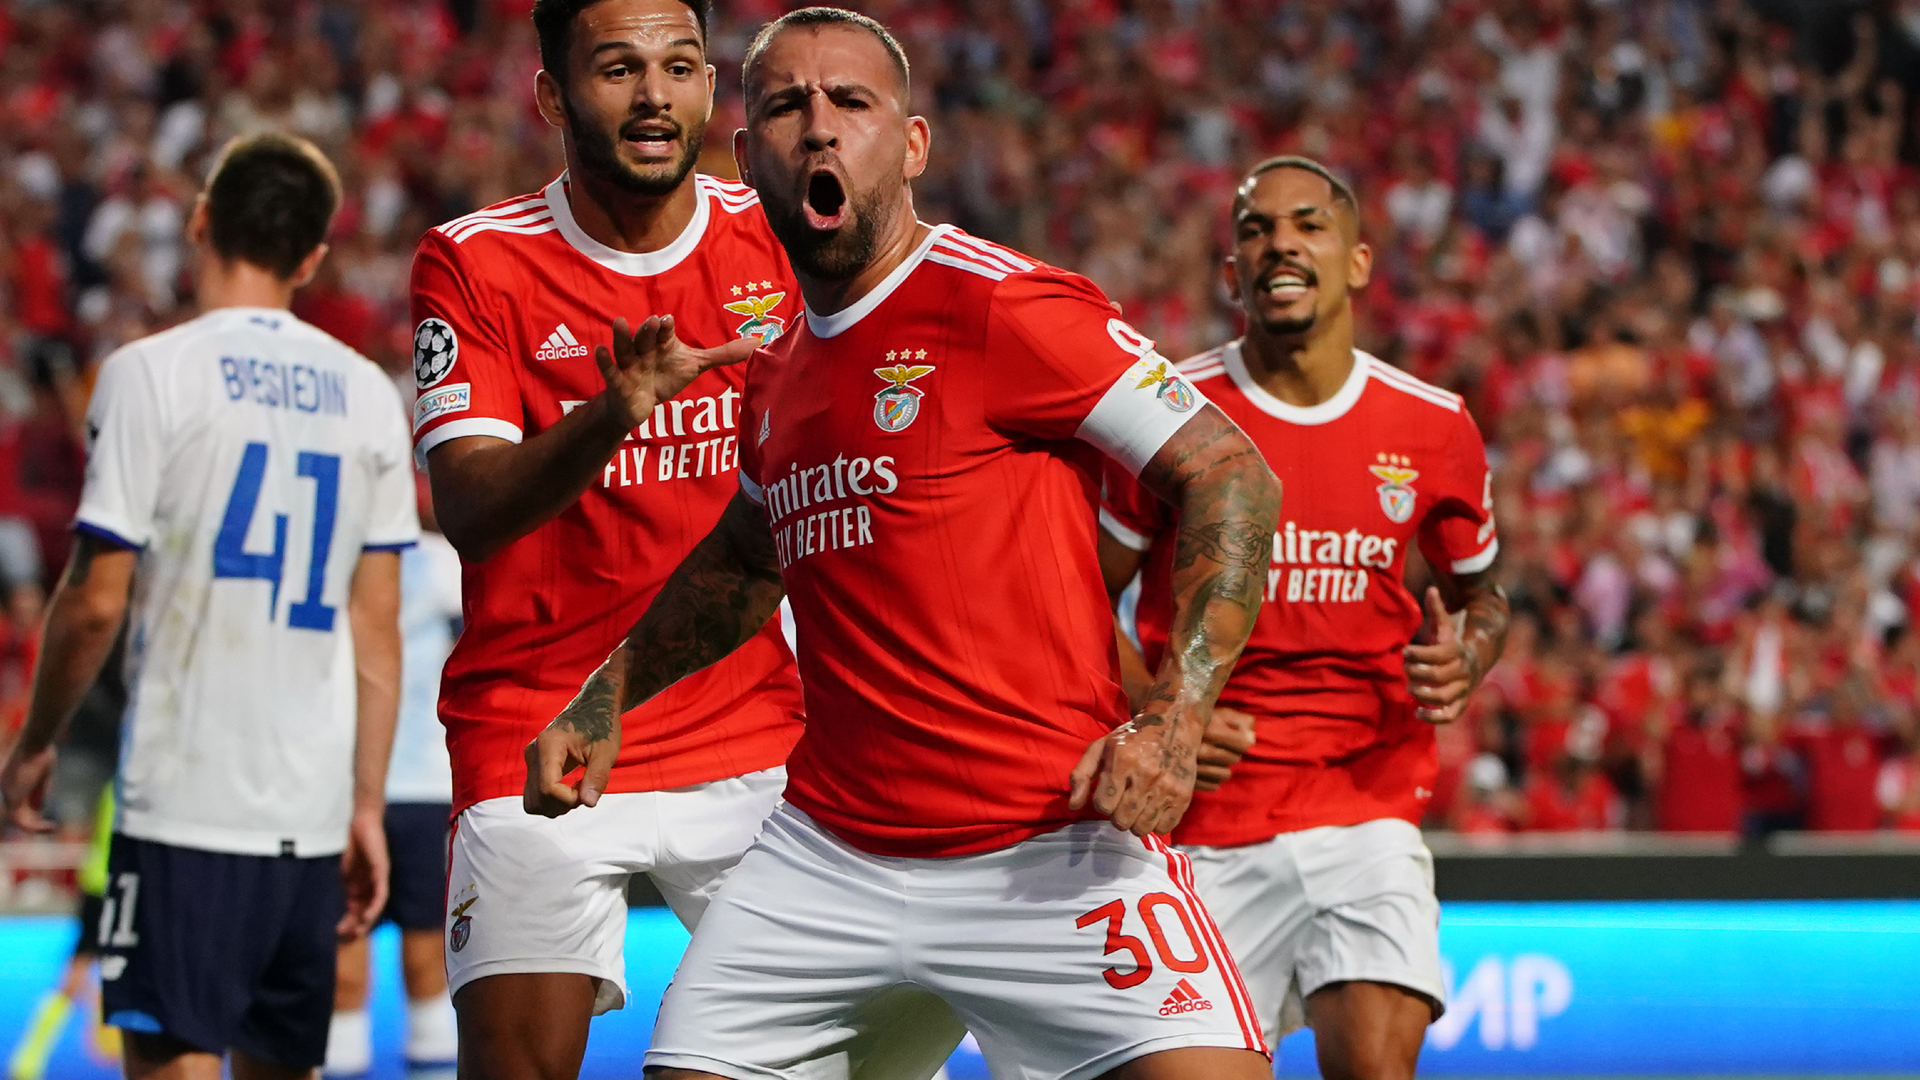 Benfica cruise past Dynamo Kyiv to reach group stage